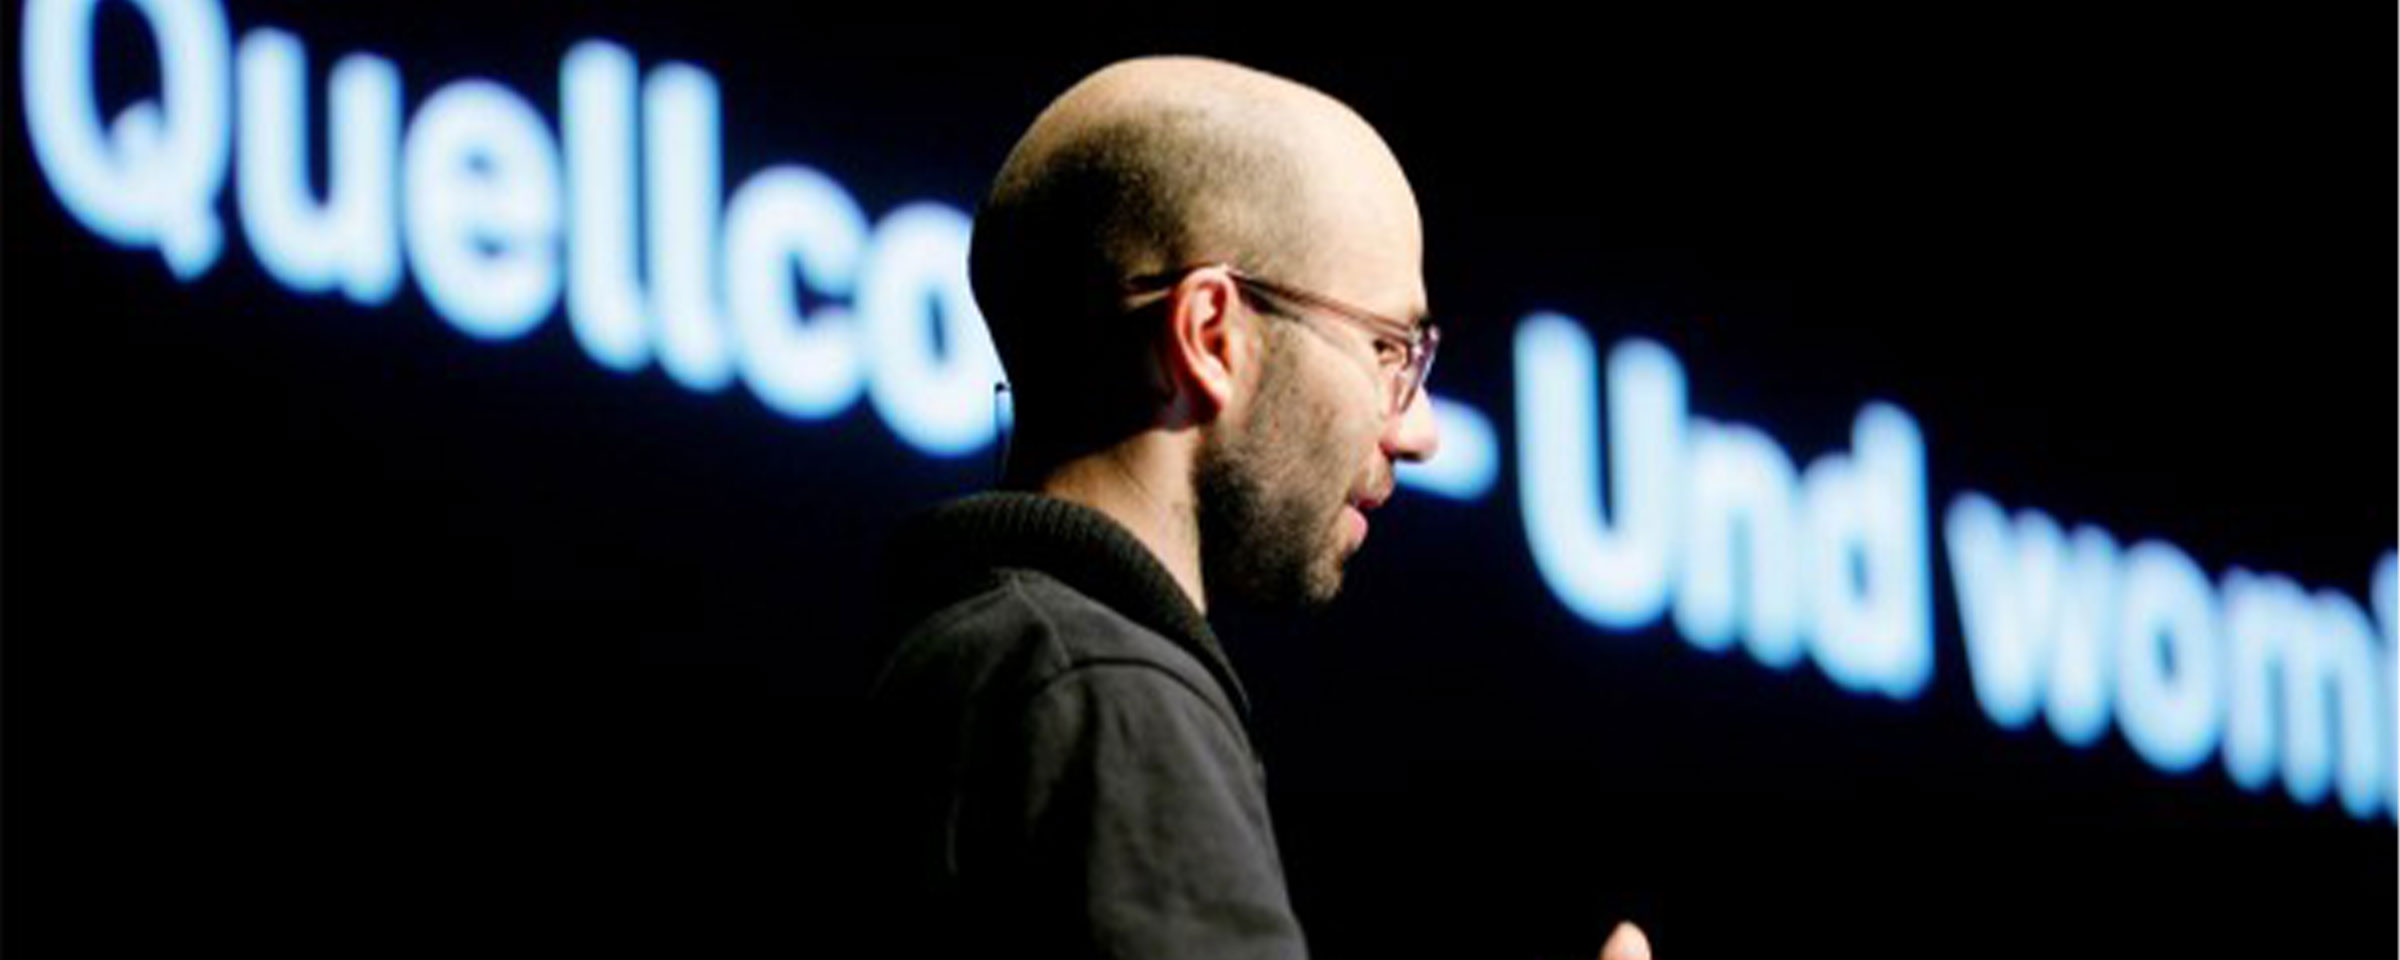 Benedikt Groß gives a lecture at the Decoded Conference 2010